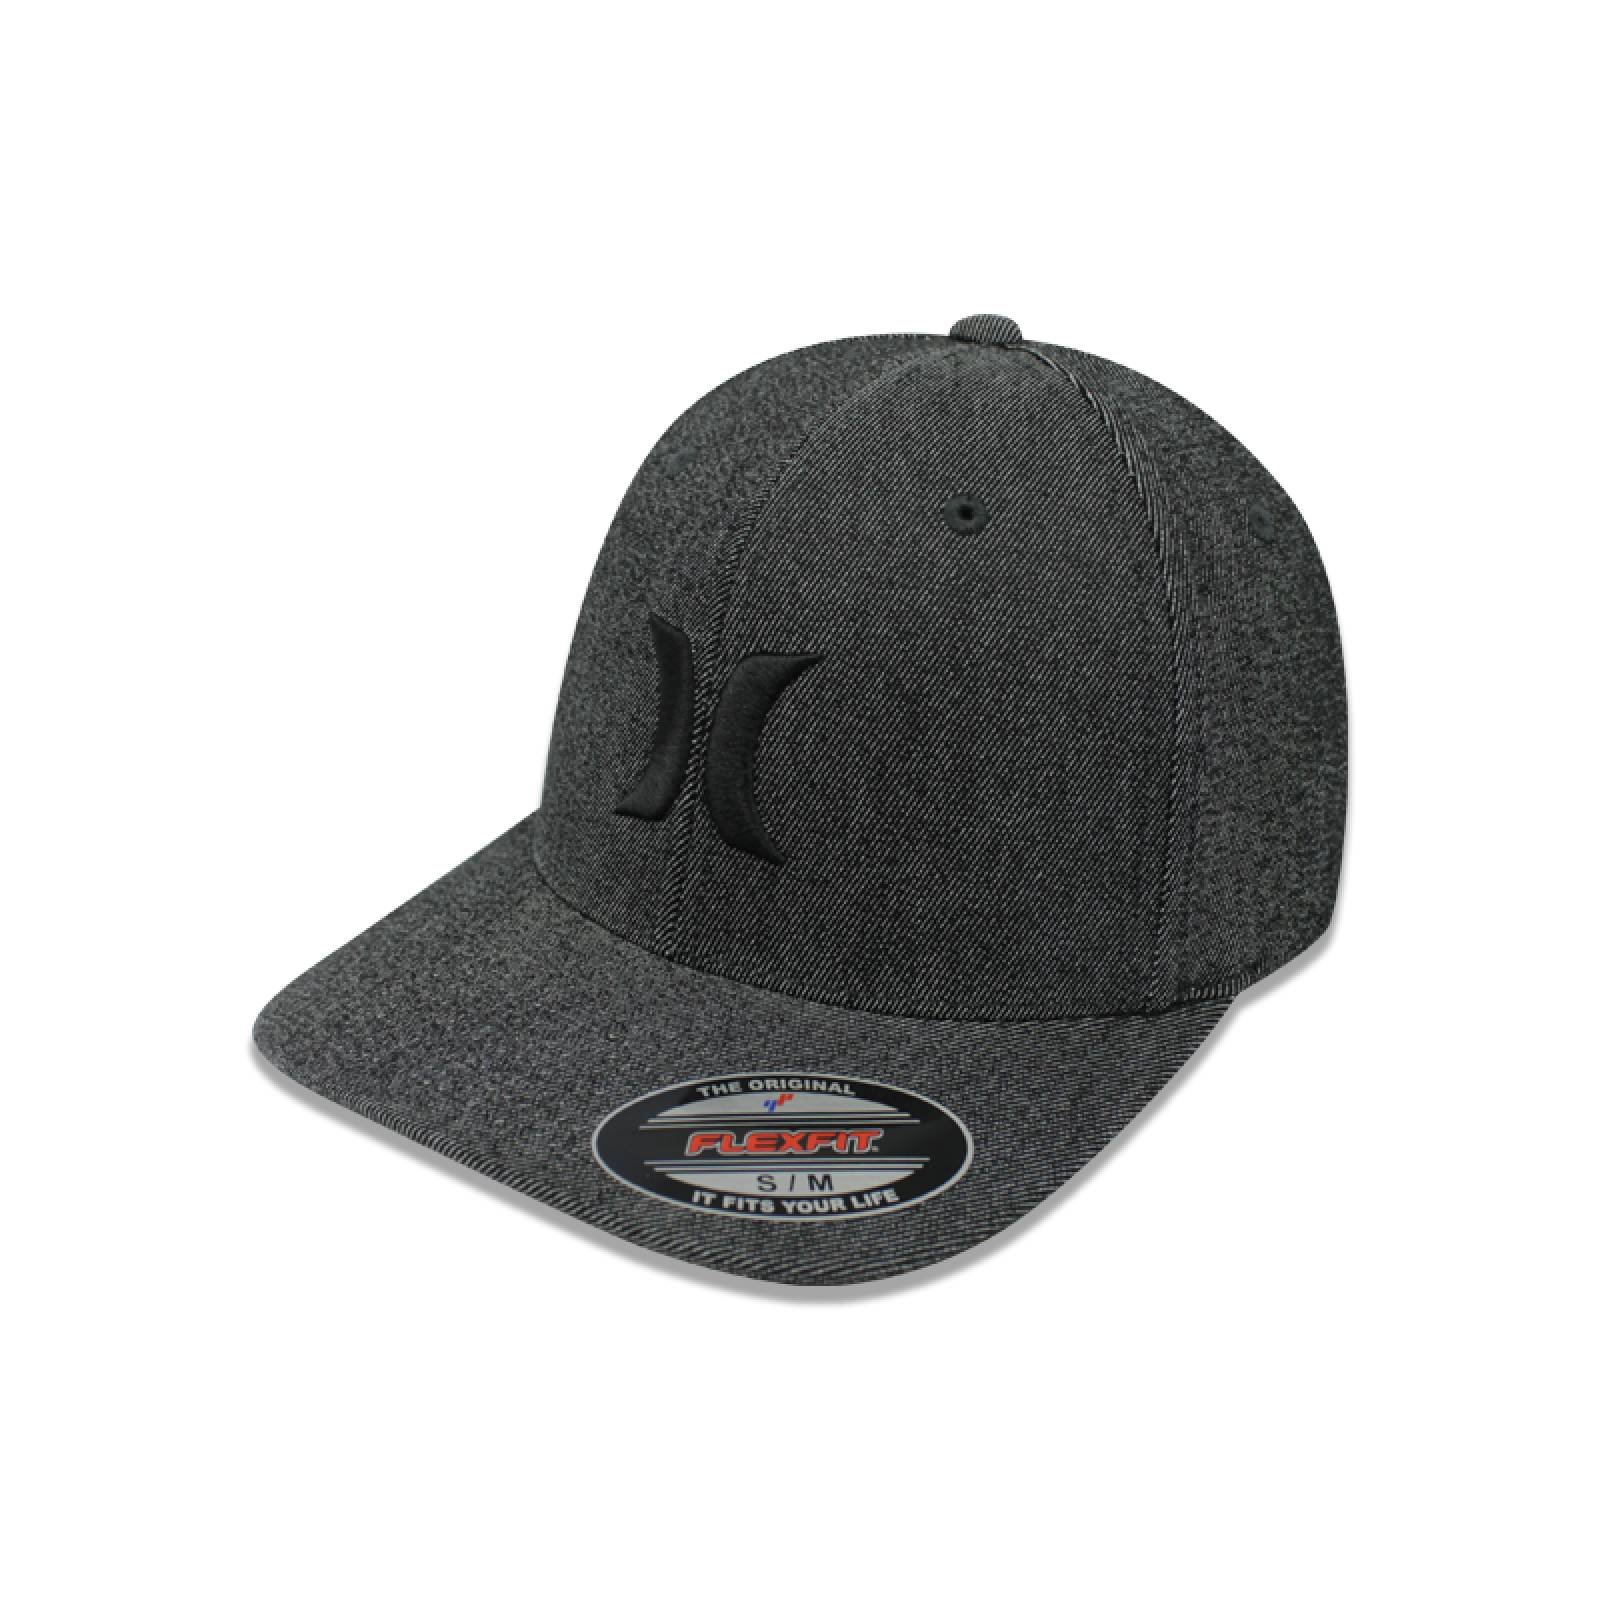 GORRA HURLEY ANTHRACITE BLK SUITS OUTLINE HATS FFIT 